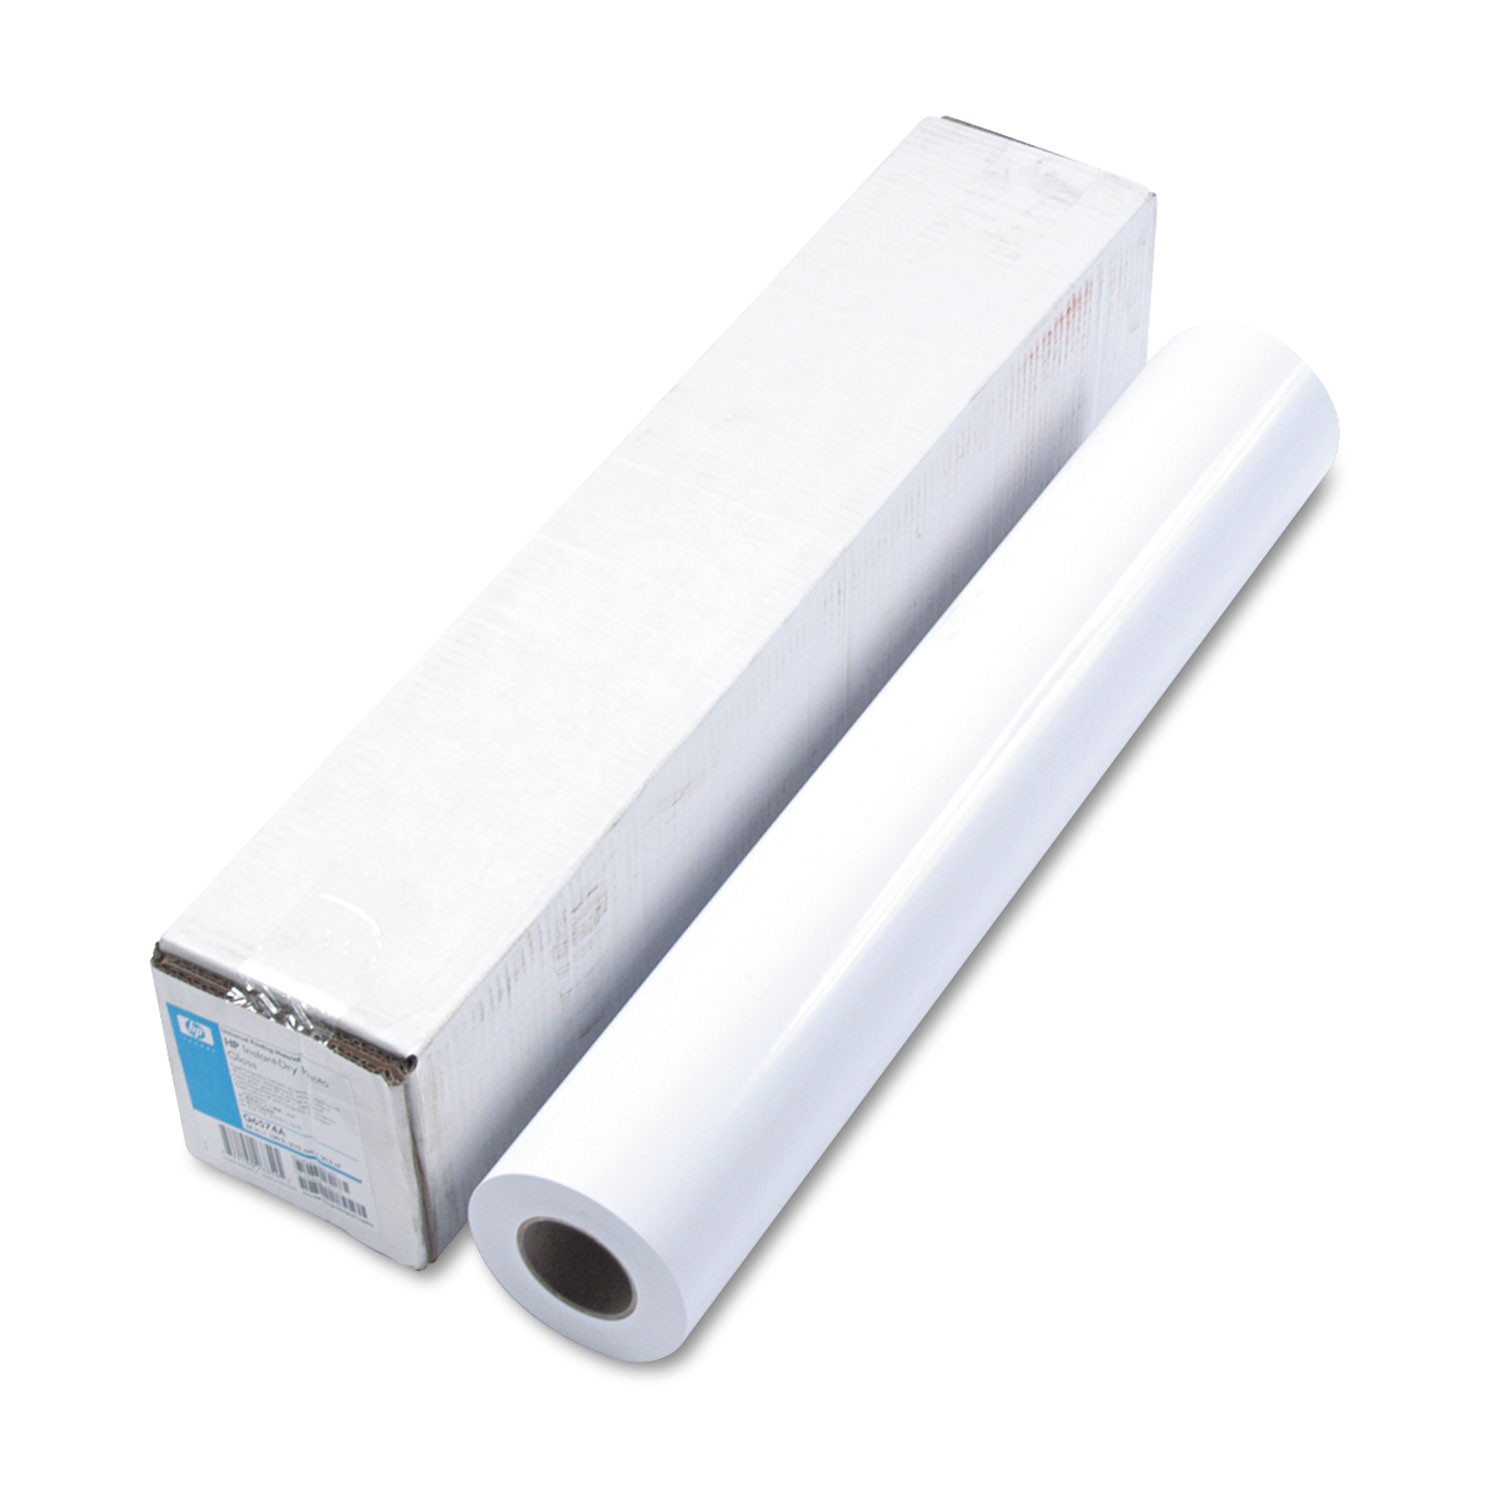  HP Q6574A DesignJet Large Format Paper for Inkjet Prints, 7 mil, 24 x 100 ft, Gloss White (HEWQ6574A) 